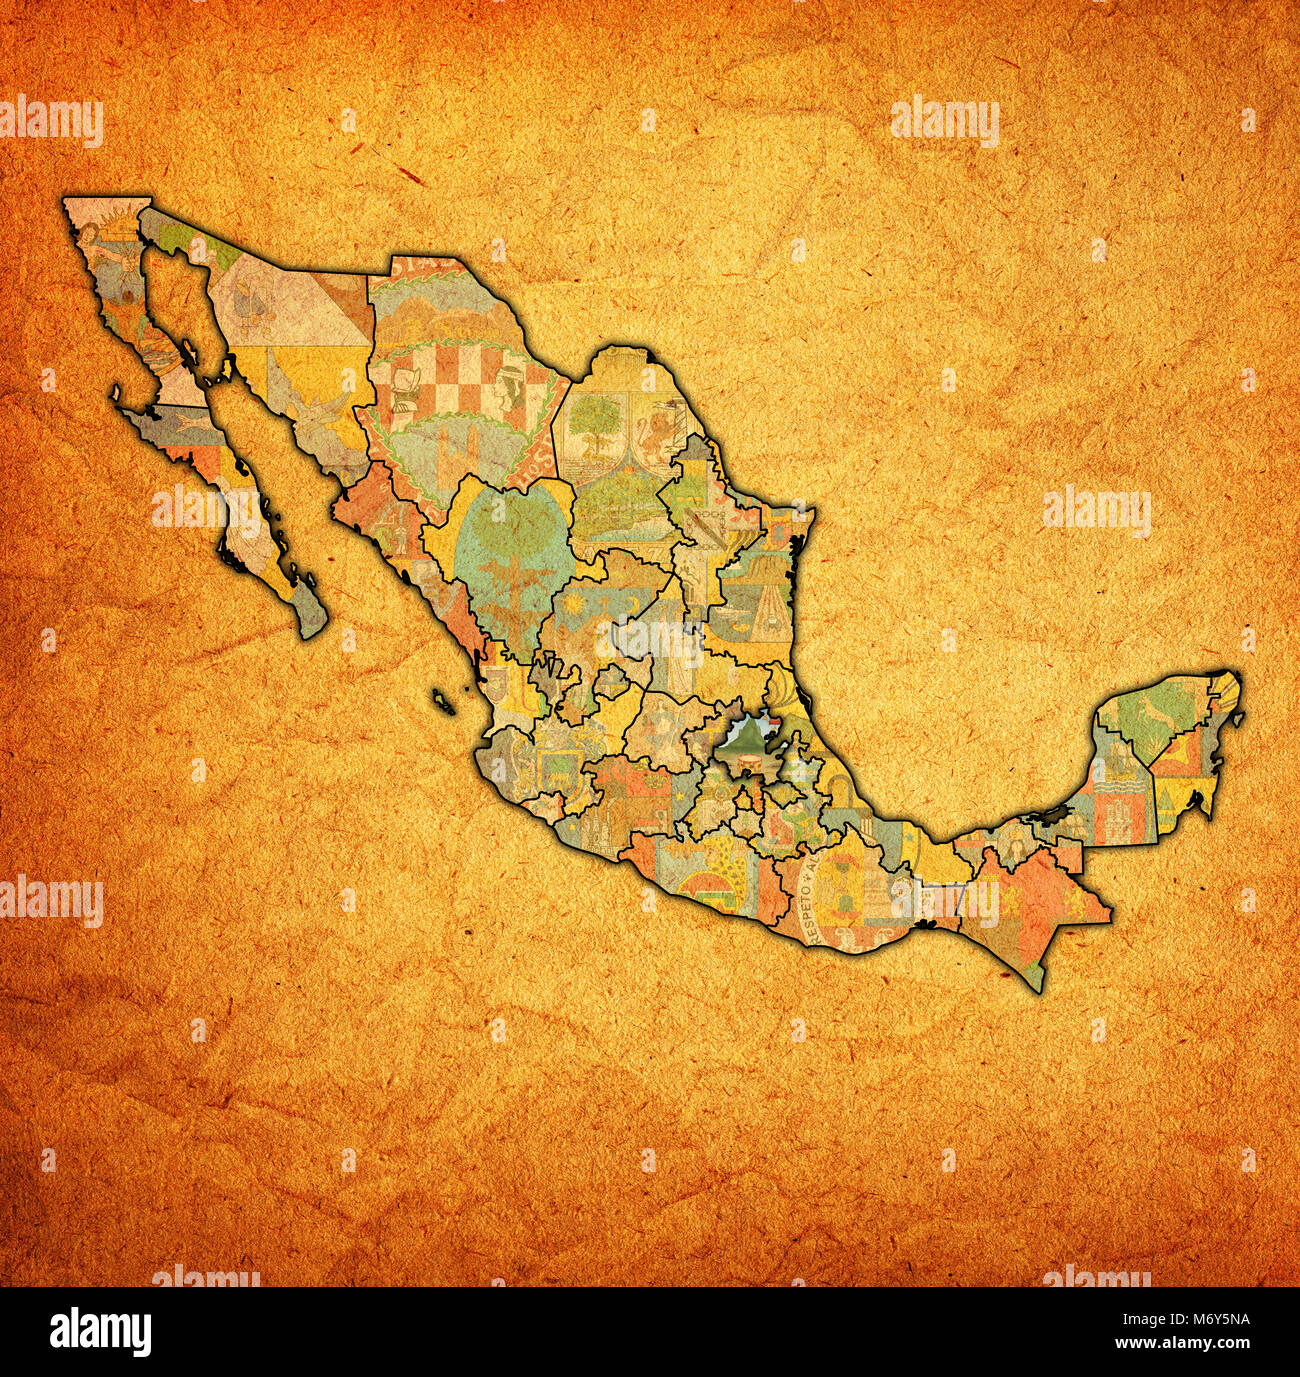 emblem of Hidalgo state on map with administrative divisions and borders of Mexico Stock Photo